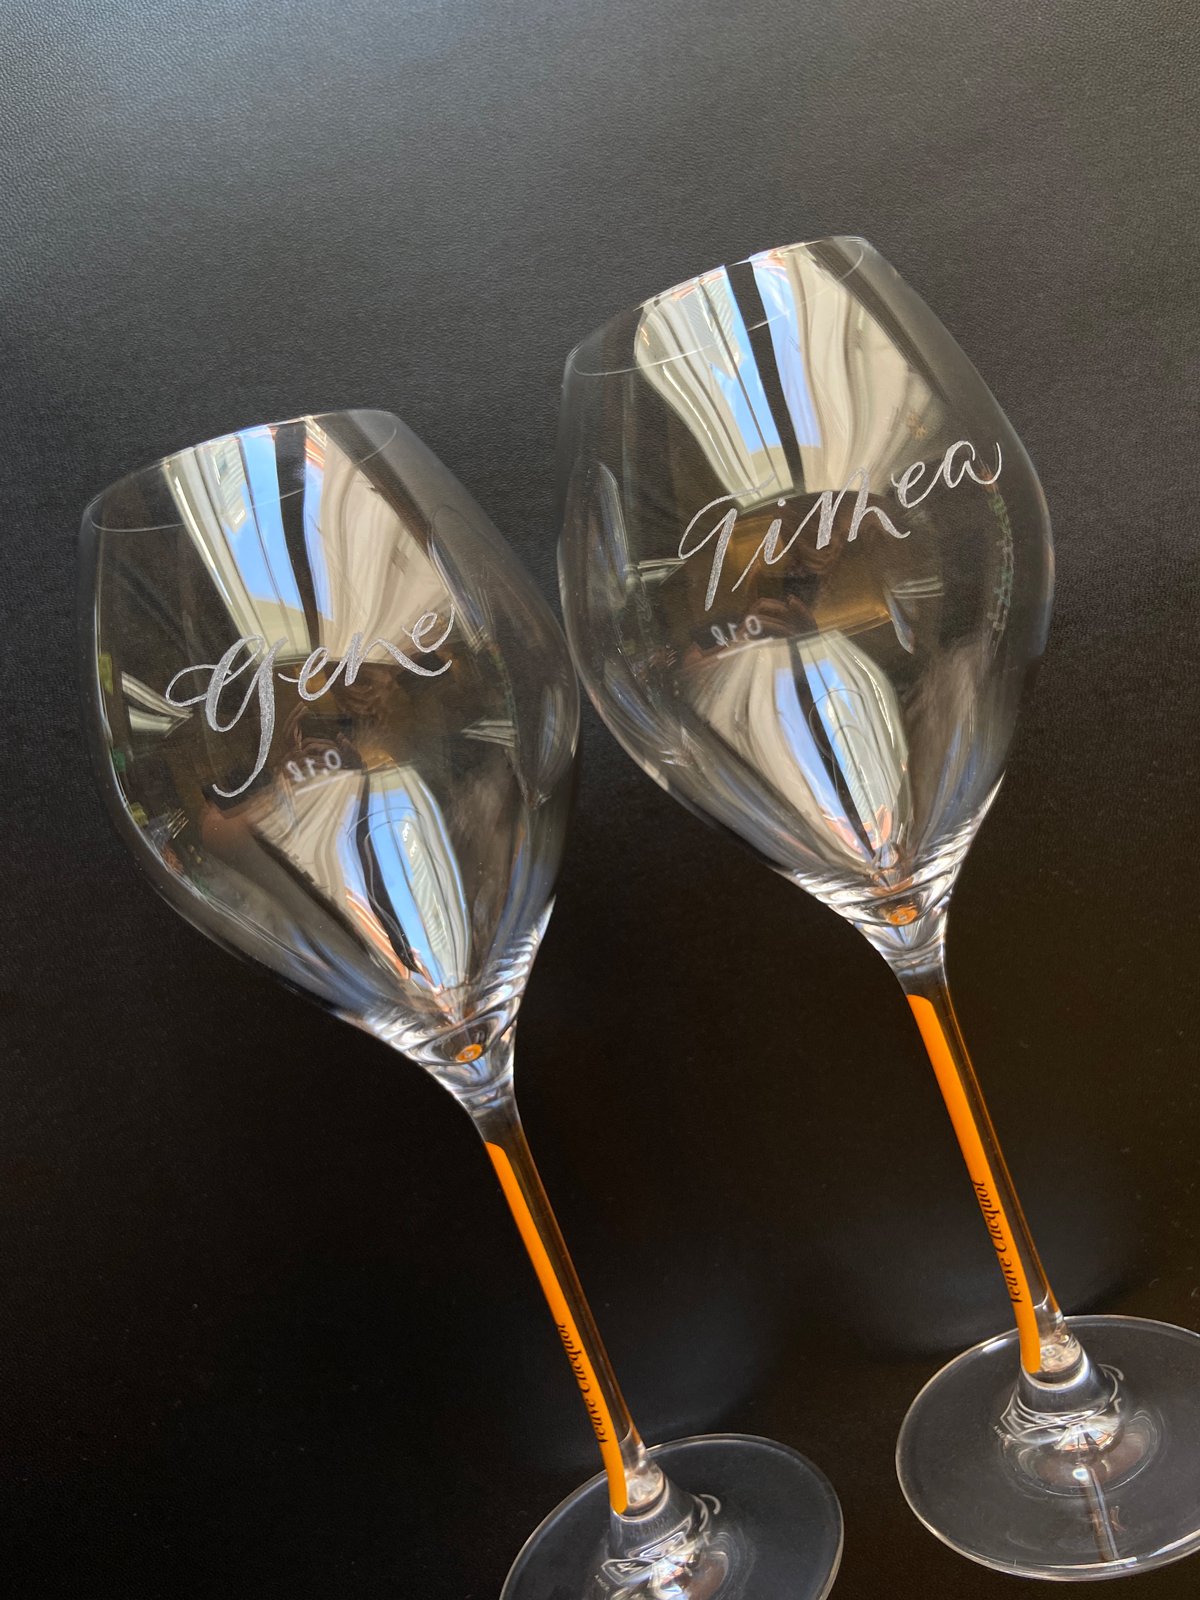 Engraved First Names on Veuve Clicquot Champagne Flutes